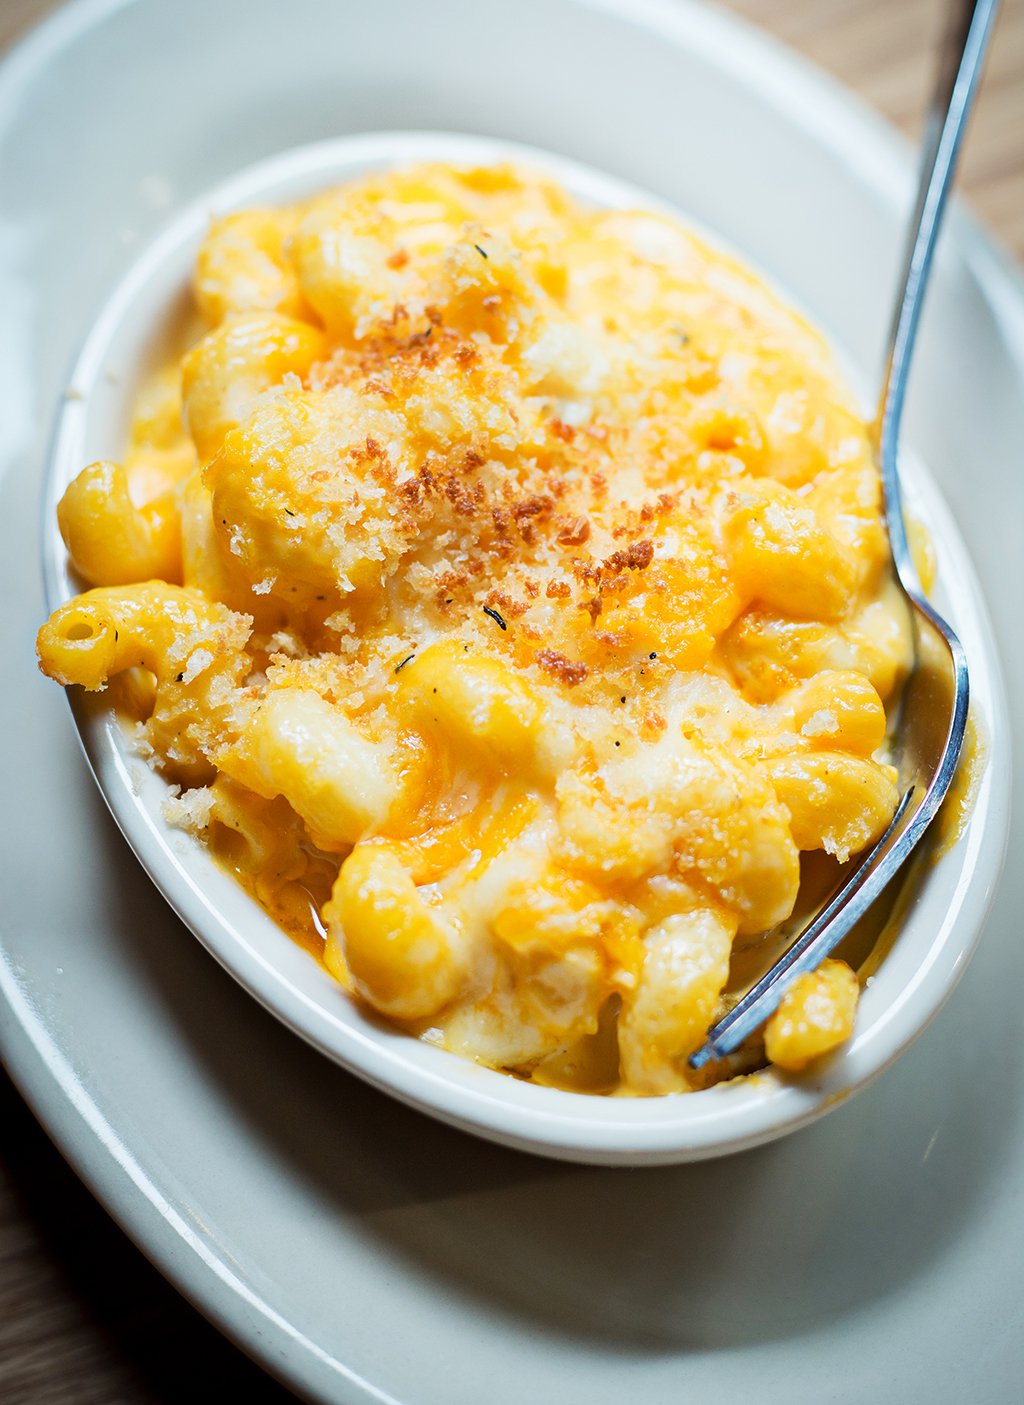 Right Proper's mac 'n' cheese. Photograph by Scott Suchman.